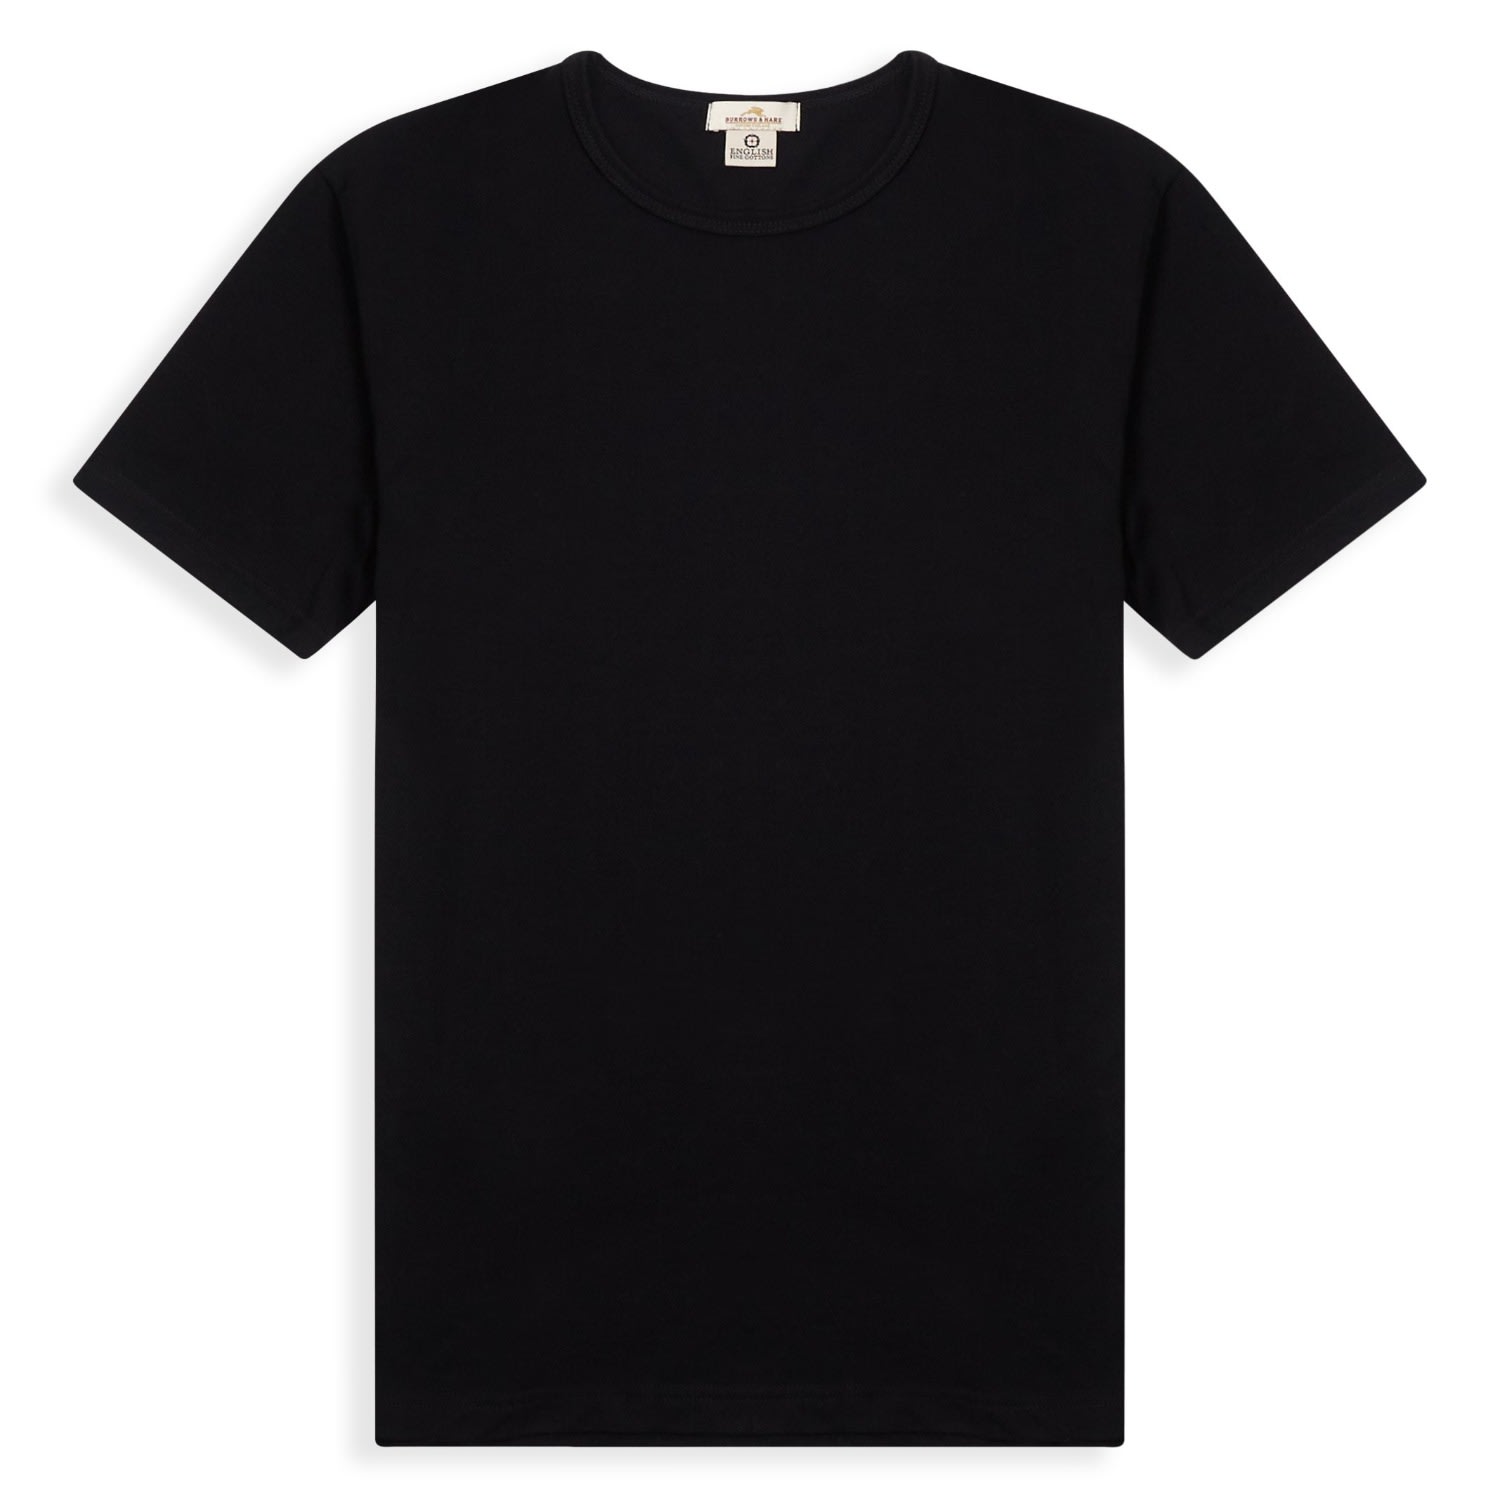 Burrows And Hare Men's T-shirt - Black